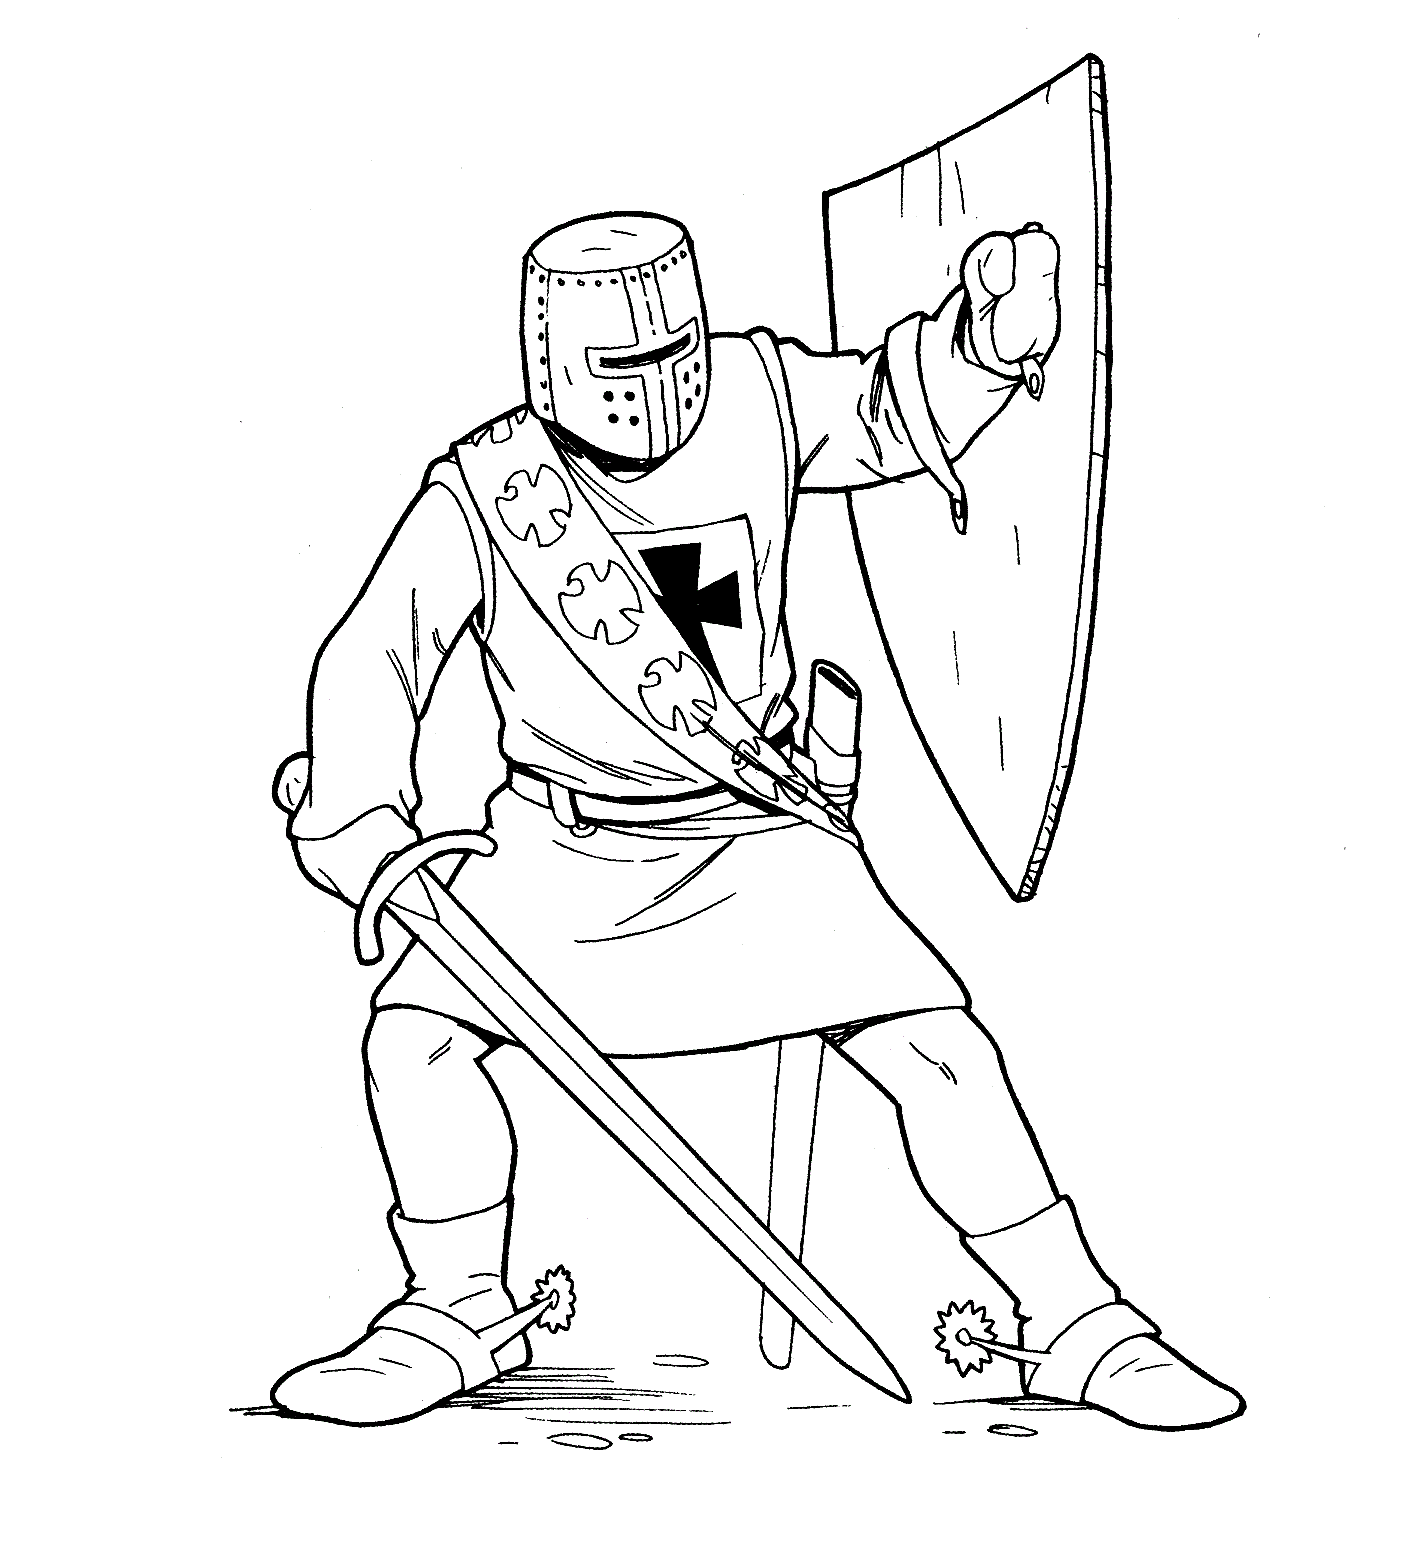 Best Roman Soldier Coloring Pages of Knight Printable for Childrens  Colouring Images - Ecolorings.info